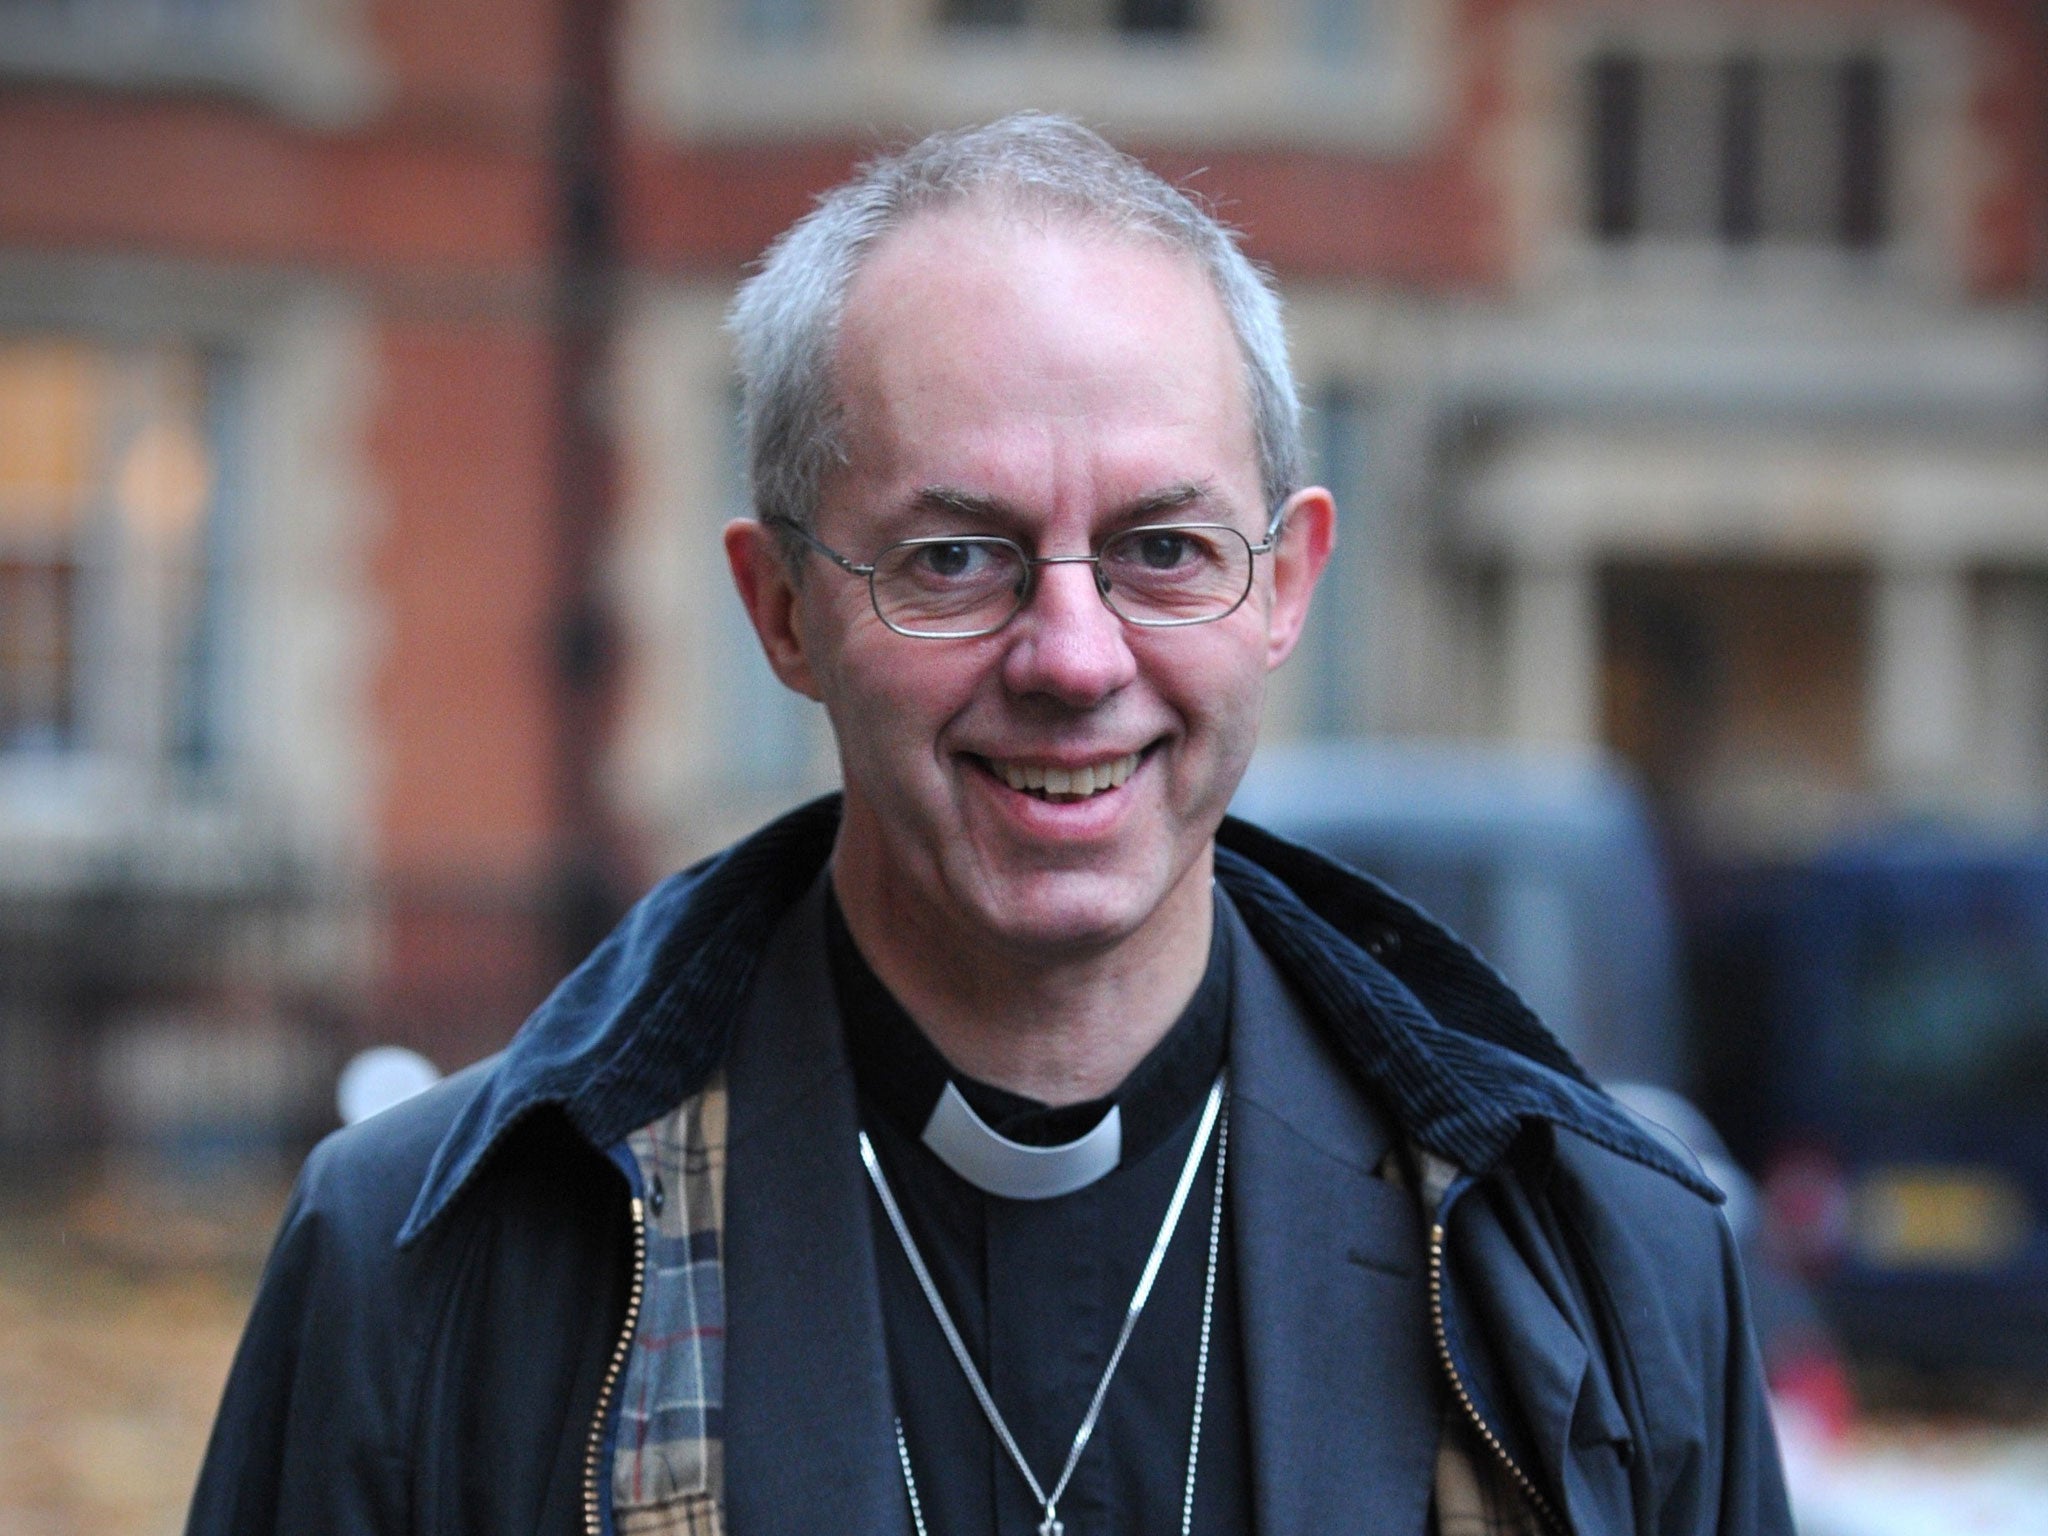 Justin Welby: The Archbishop voted against legalising gay marriage